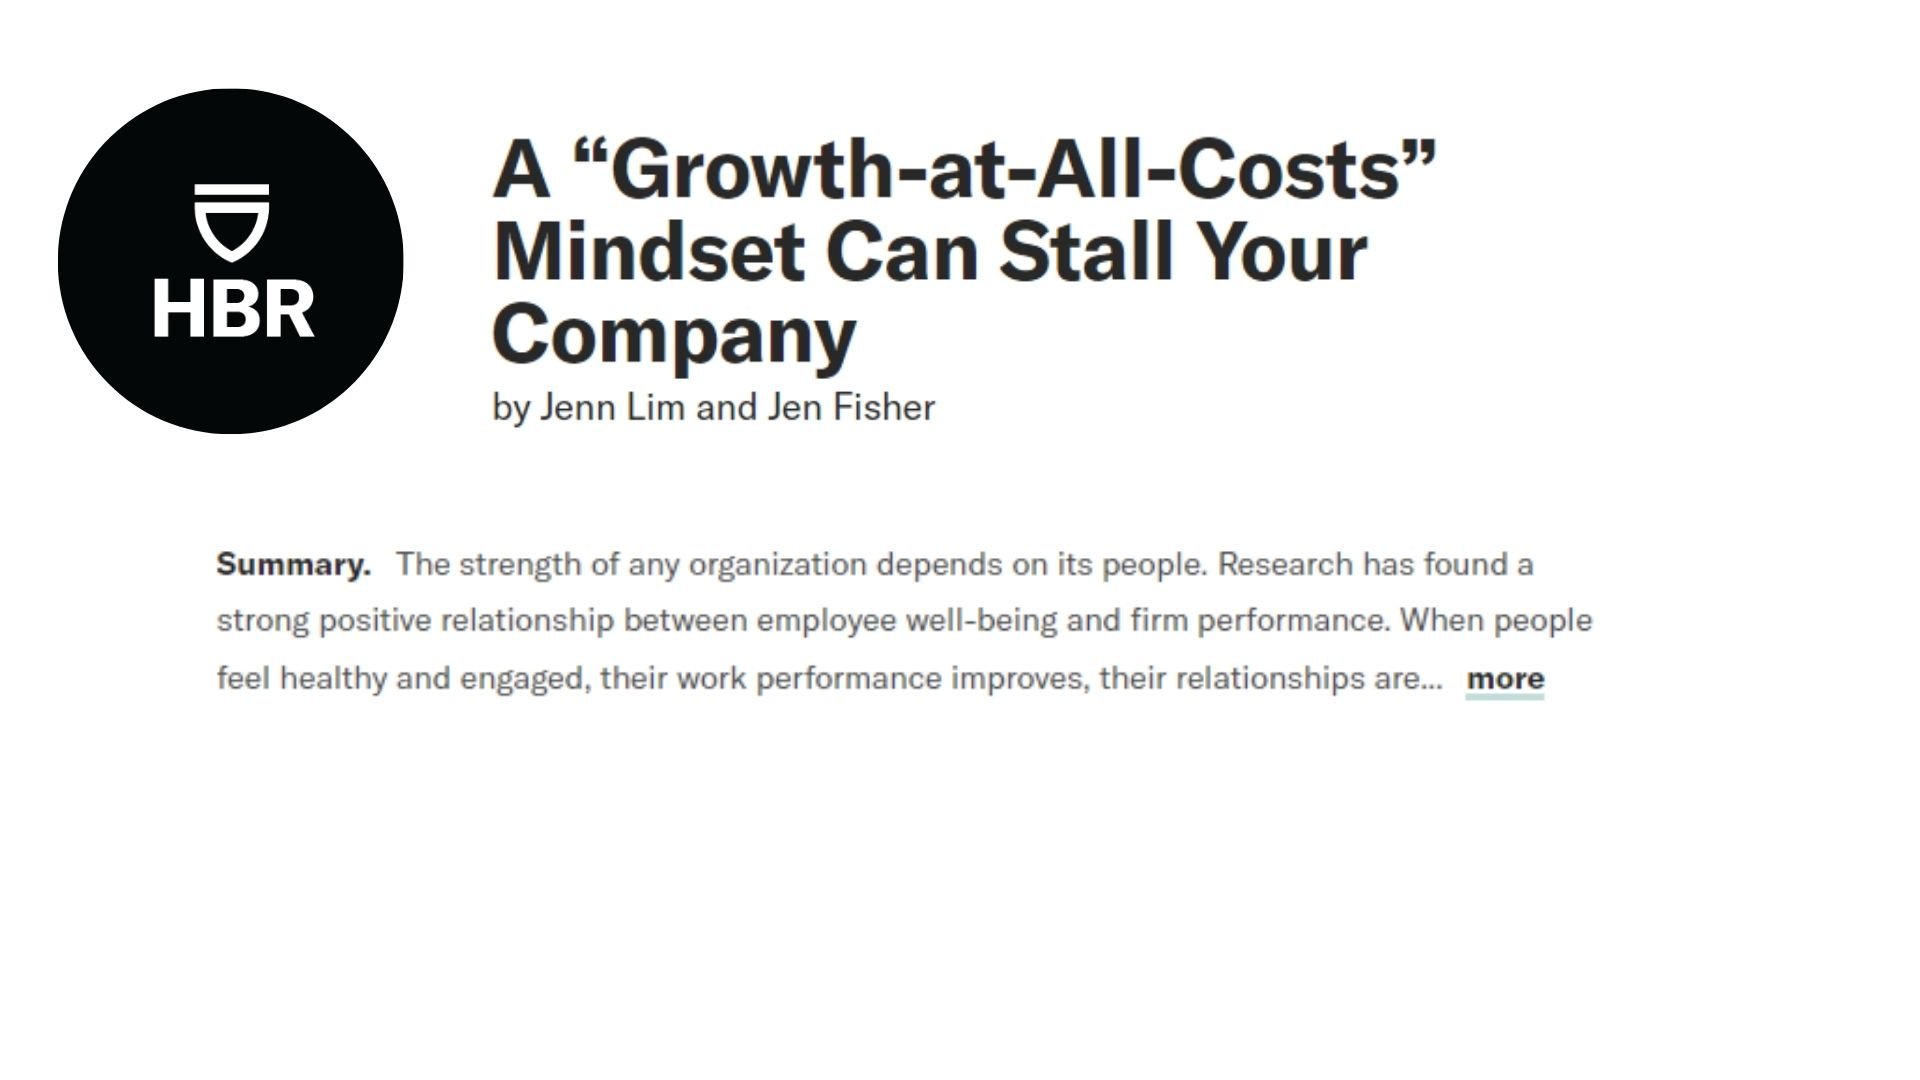 HBR: Growth At All Costs